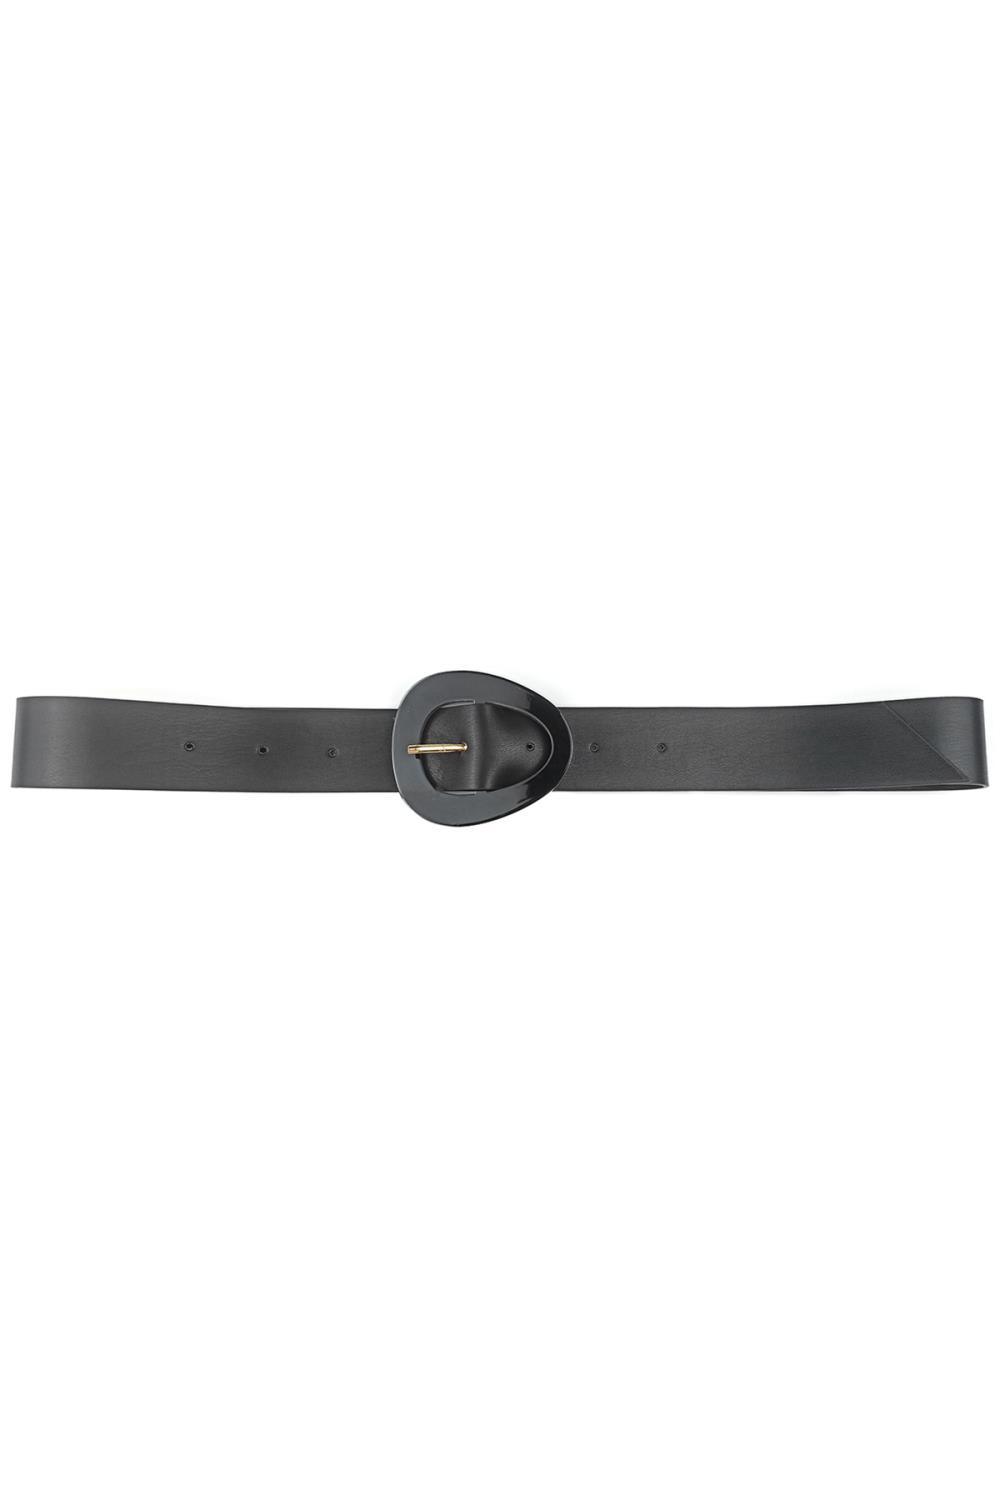 Smooth Oval Buckle Belt Naughty Smile Fashion